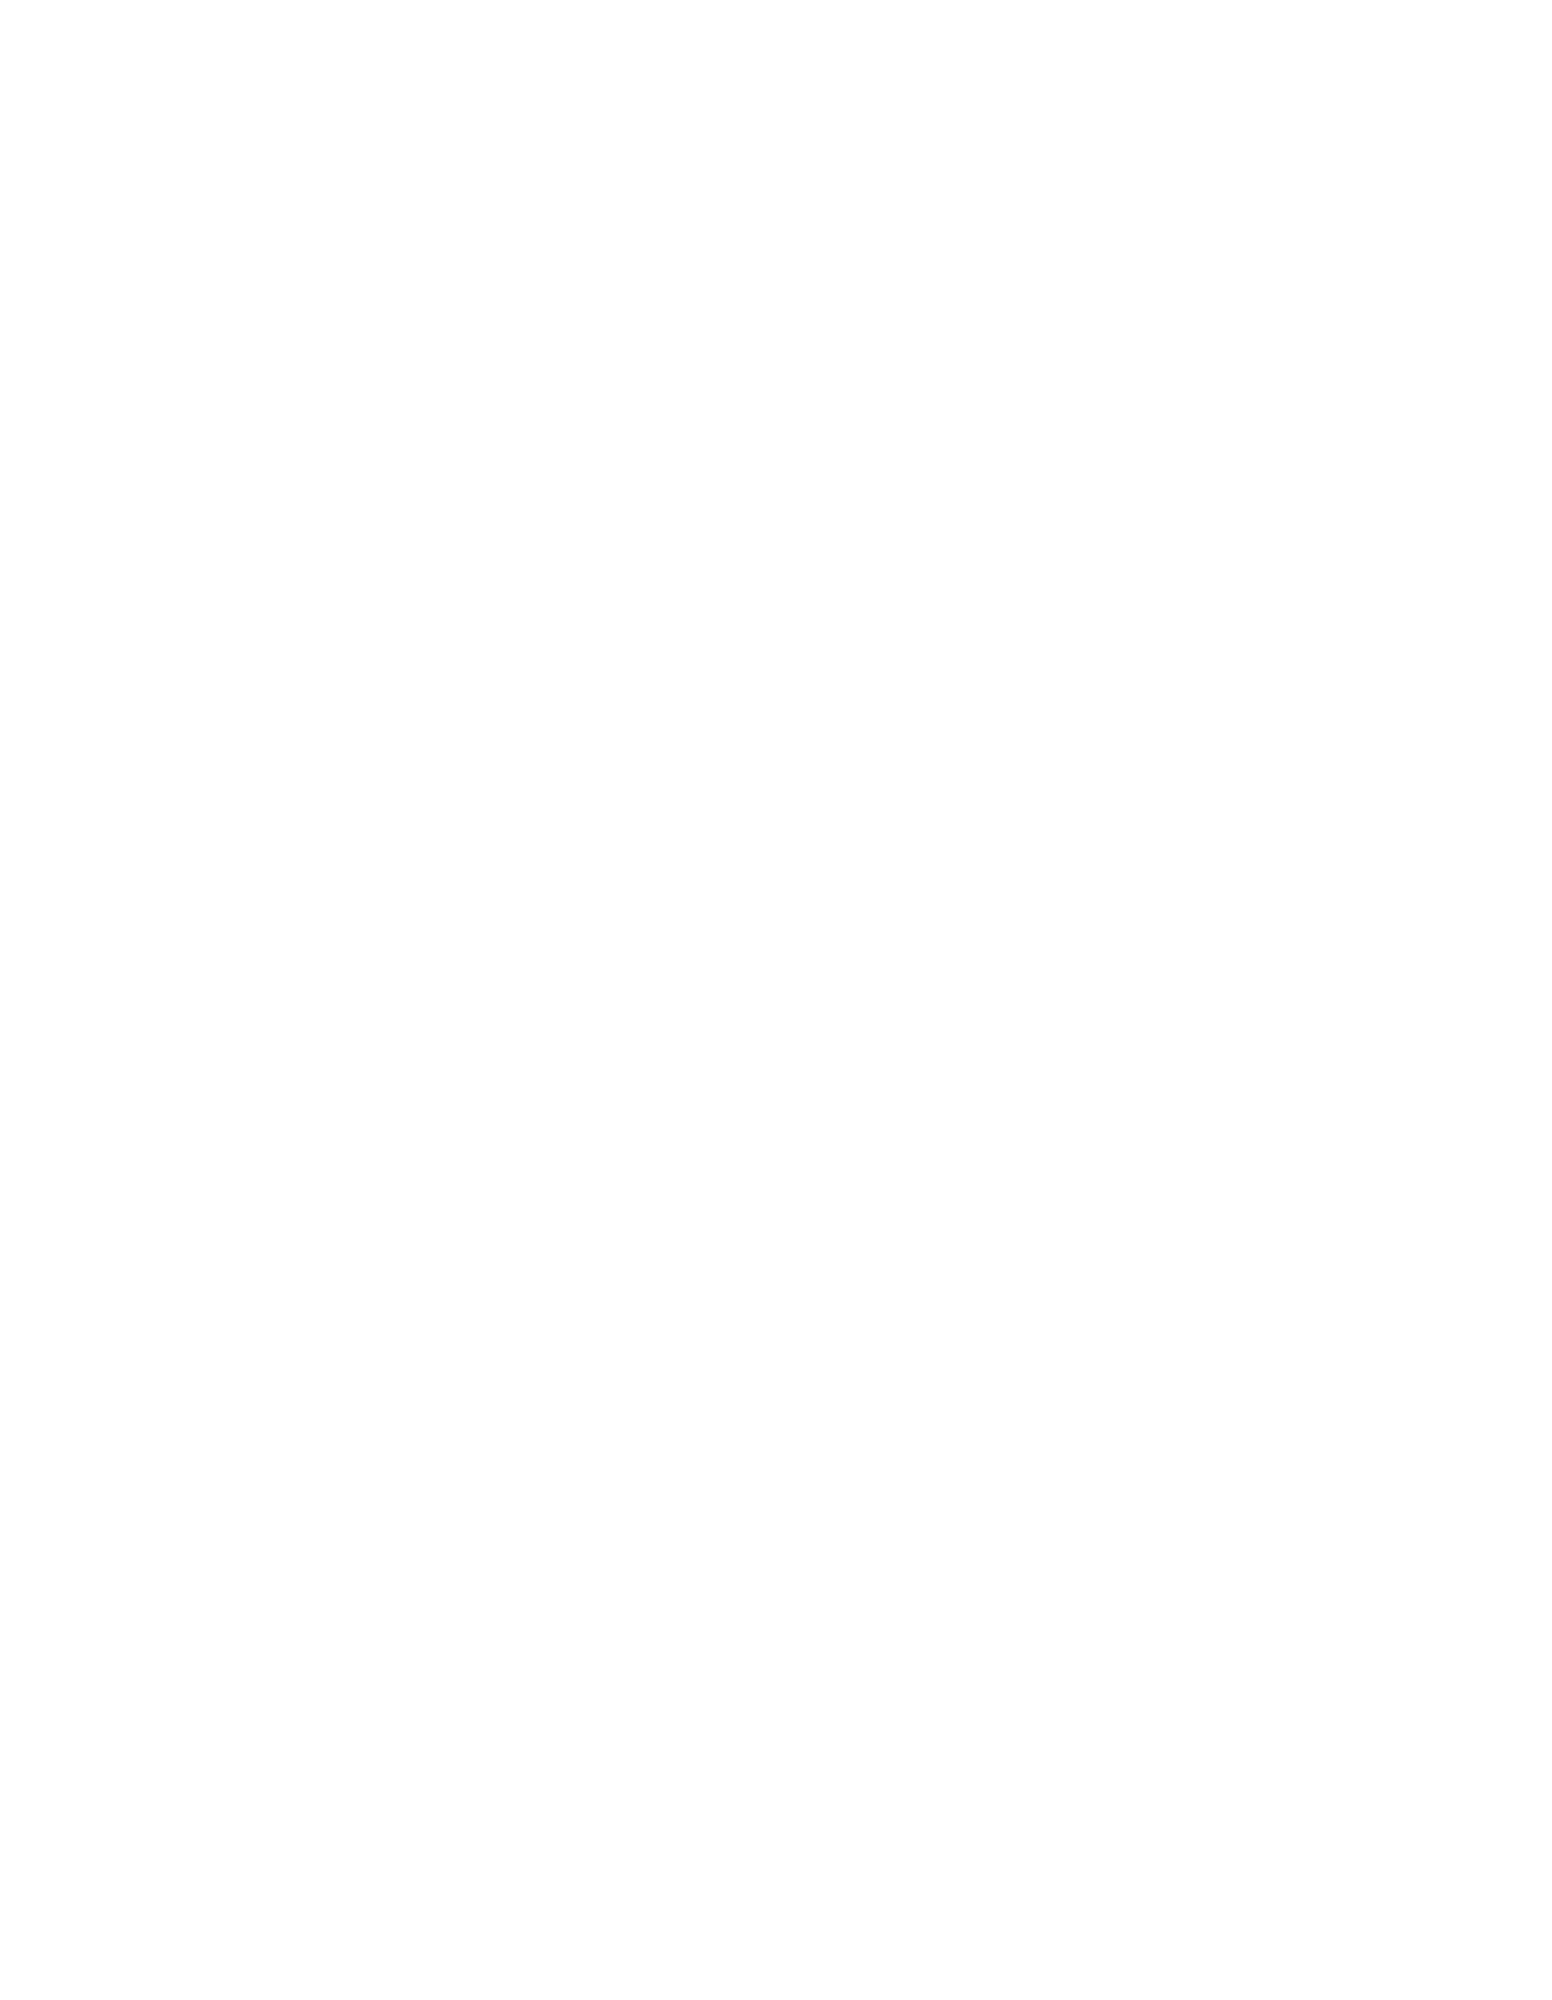 world series patch png